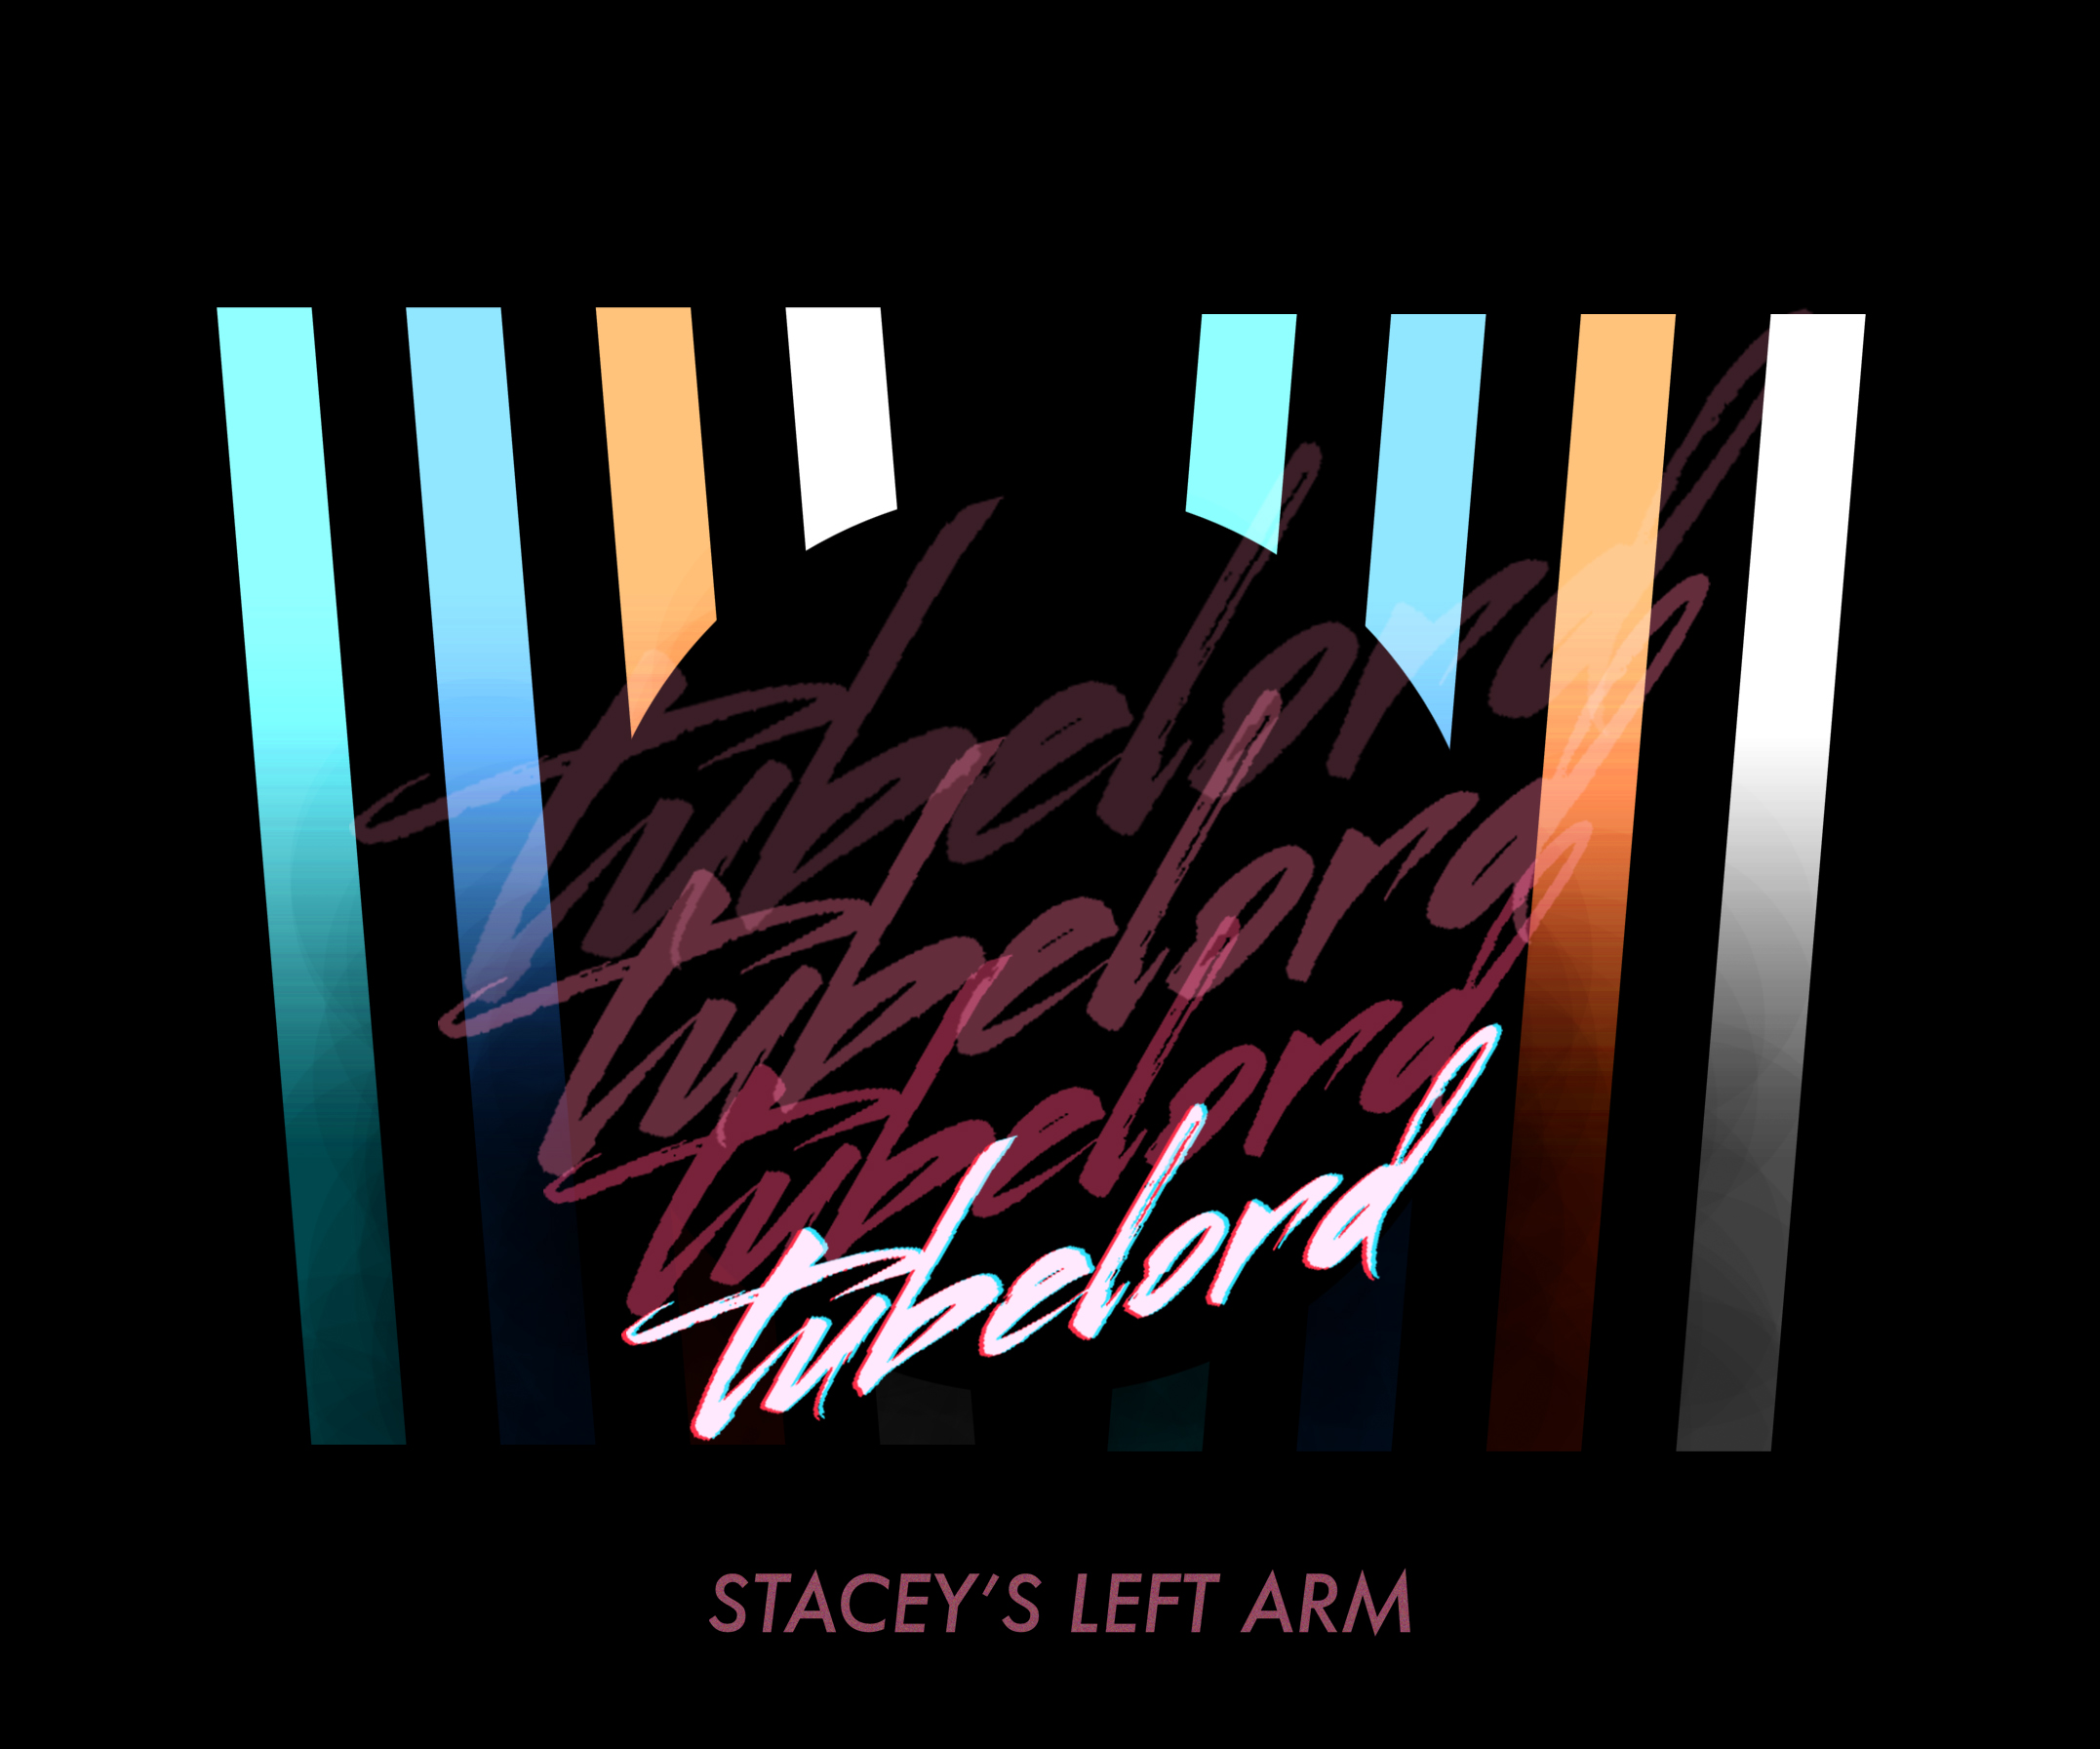 New: Tubelord – Stacey’s Left Arm